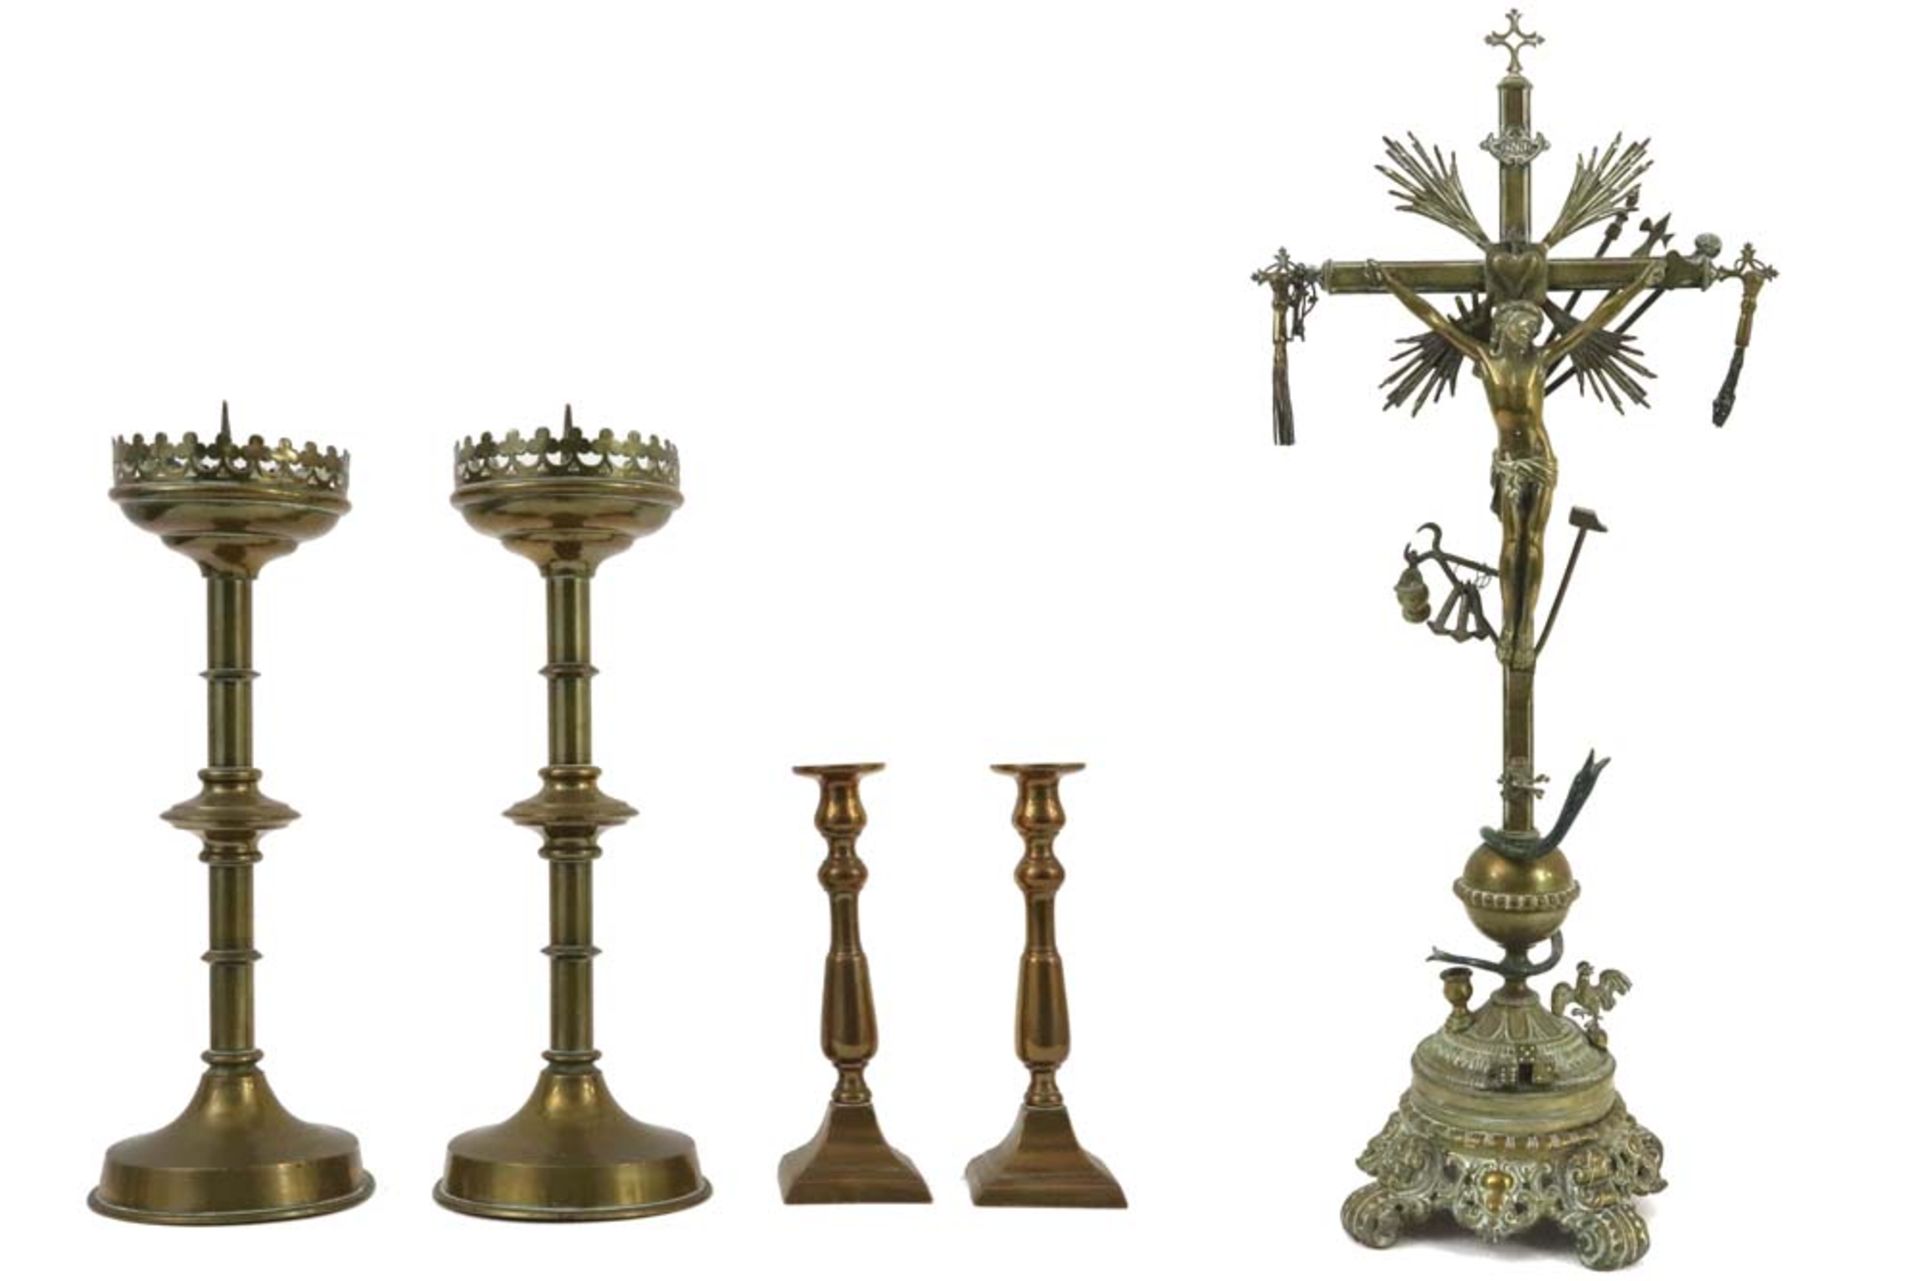 pair of antique gothic revival style candlesticks, a pair of 19th Cent. candlesticks and an